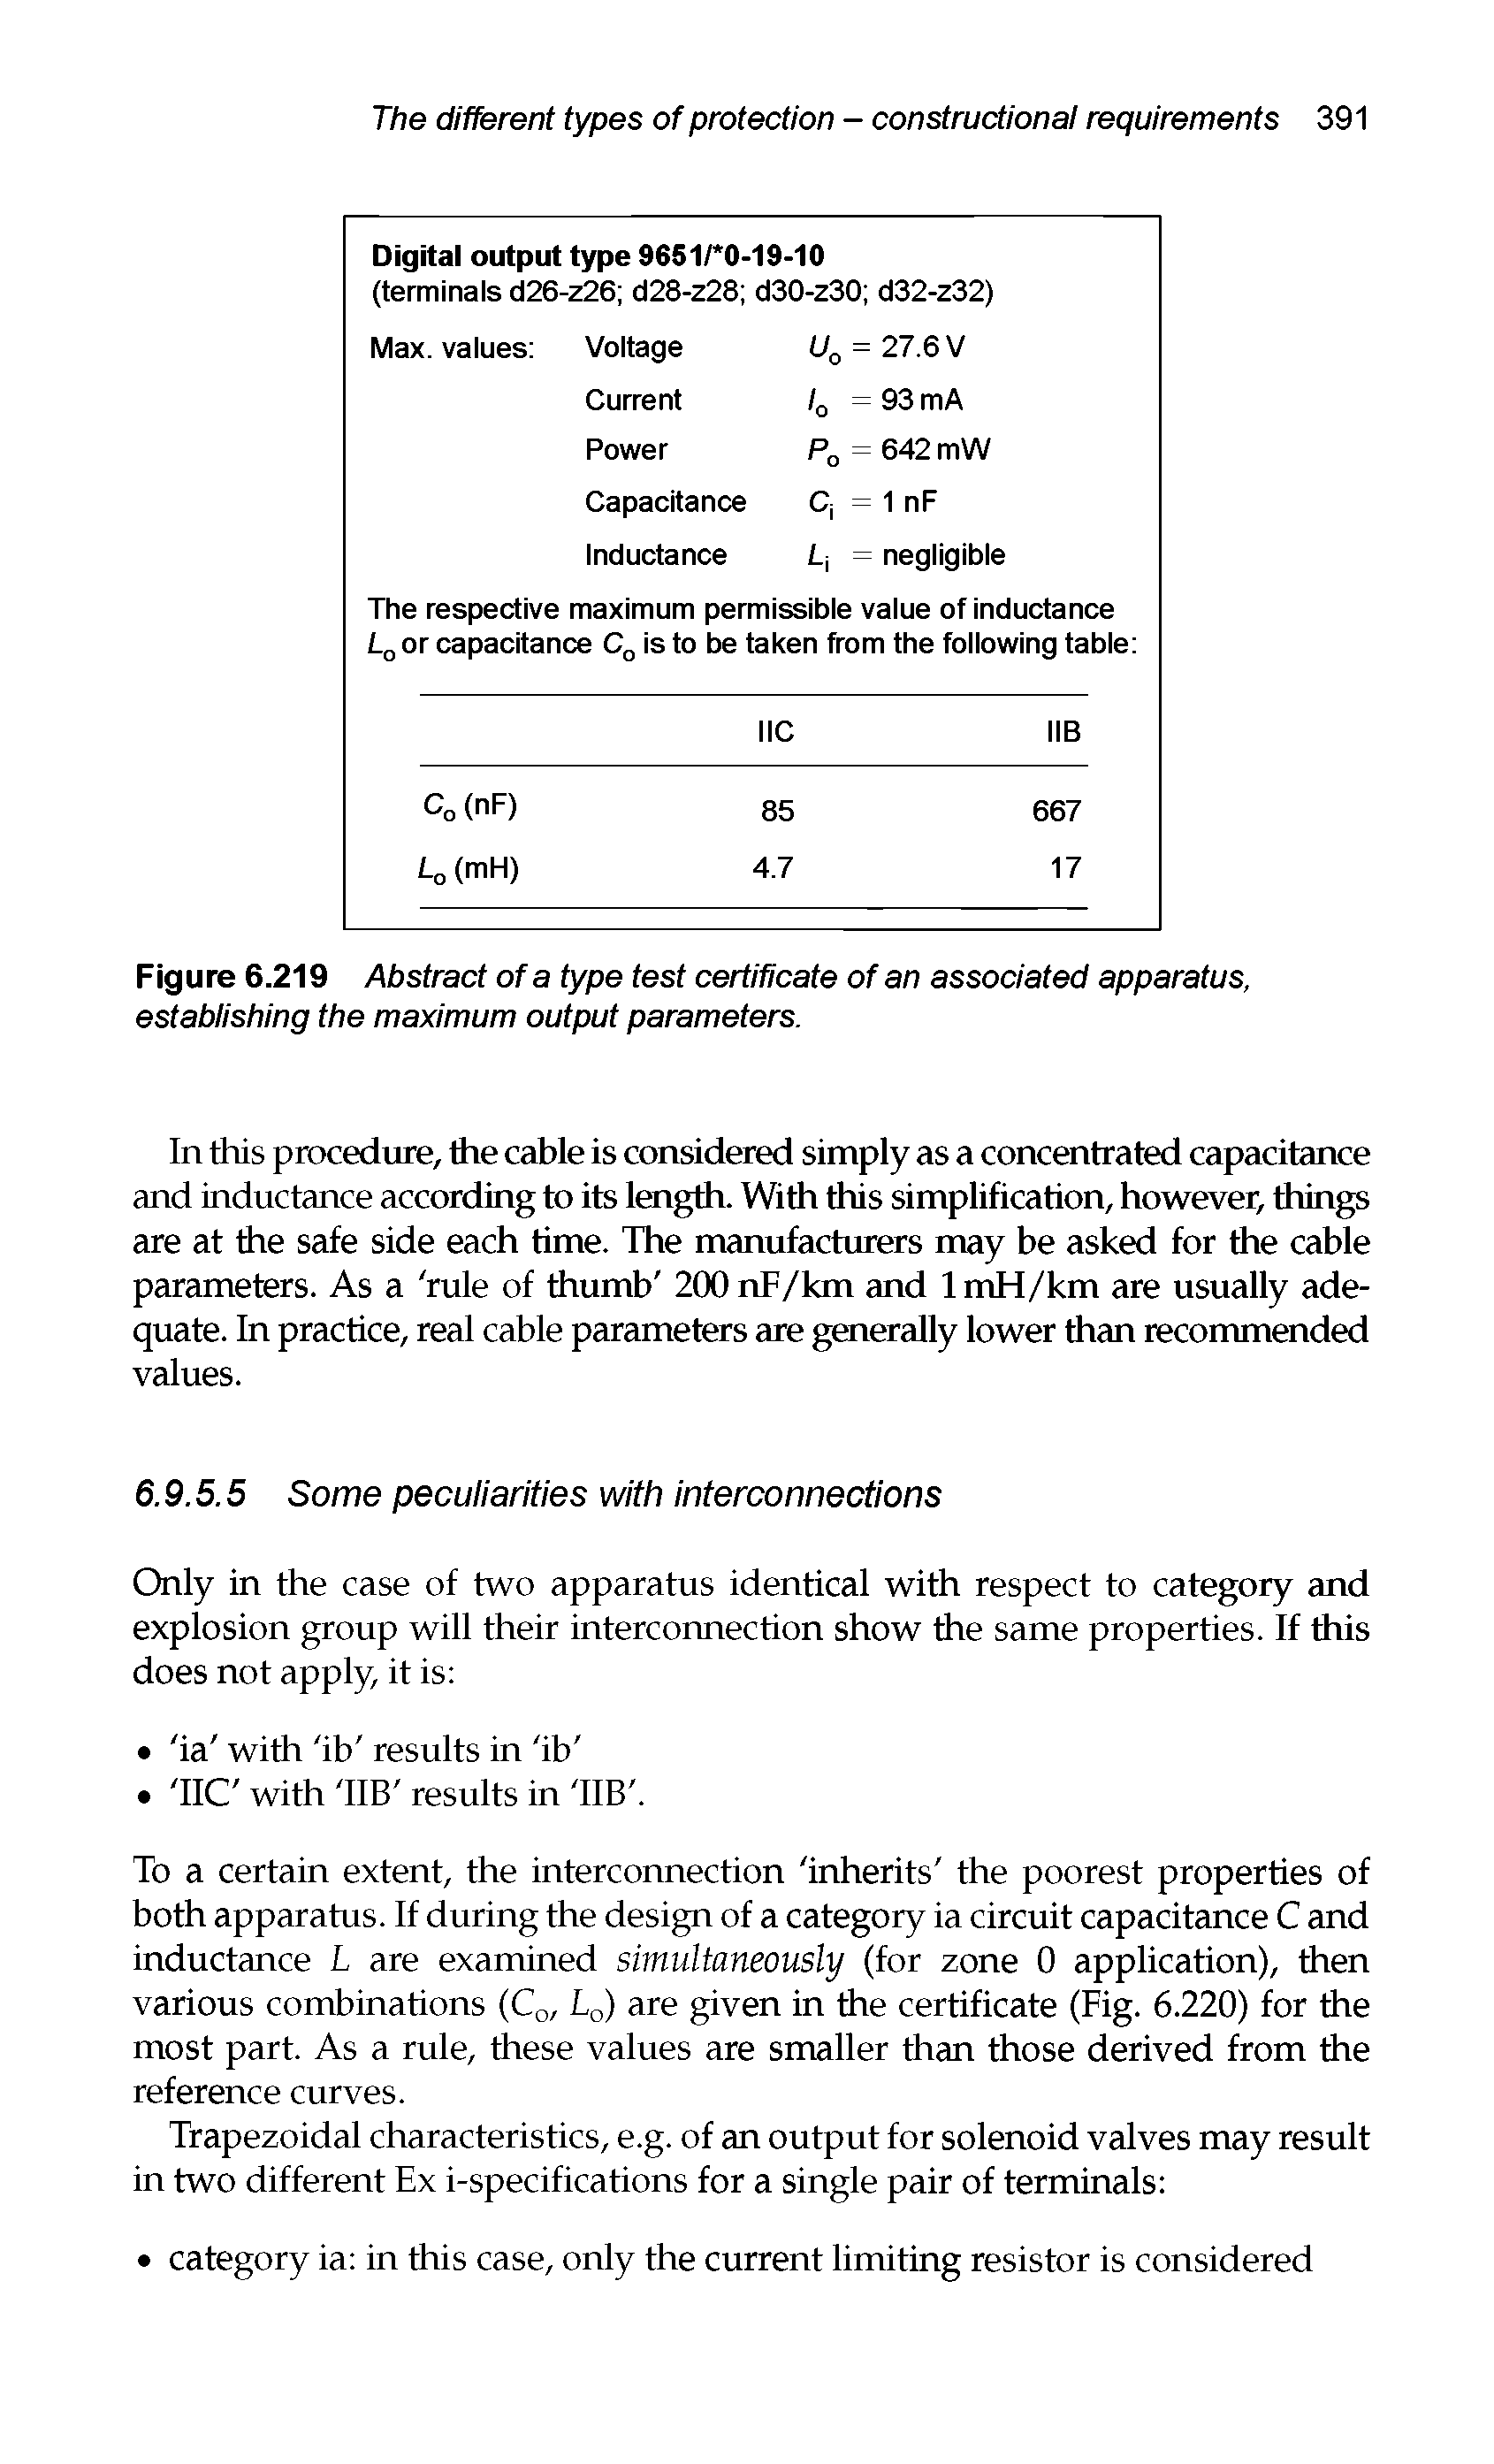 Figure 6.219 Abstract of a type test certificate of an associated apparatus, establishing the maximum output parameters.